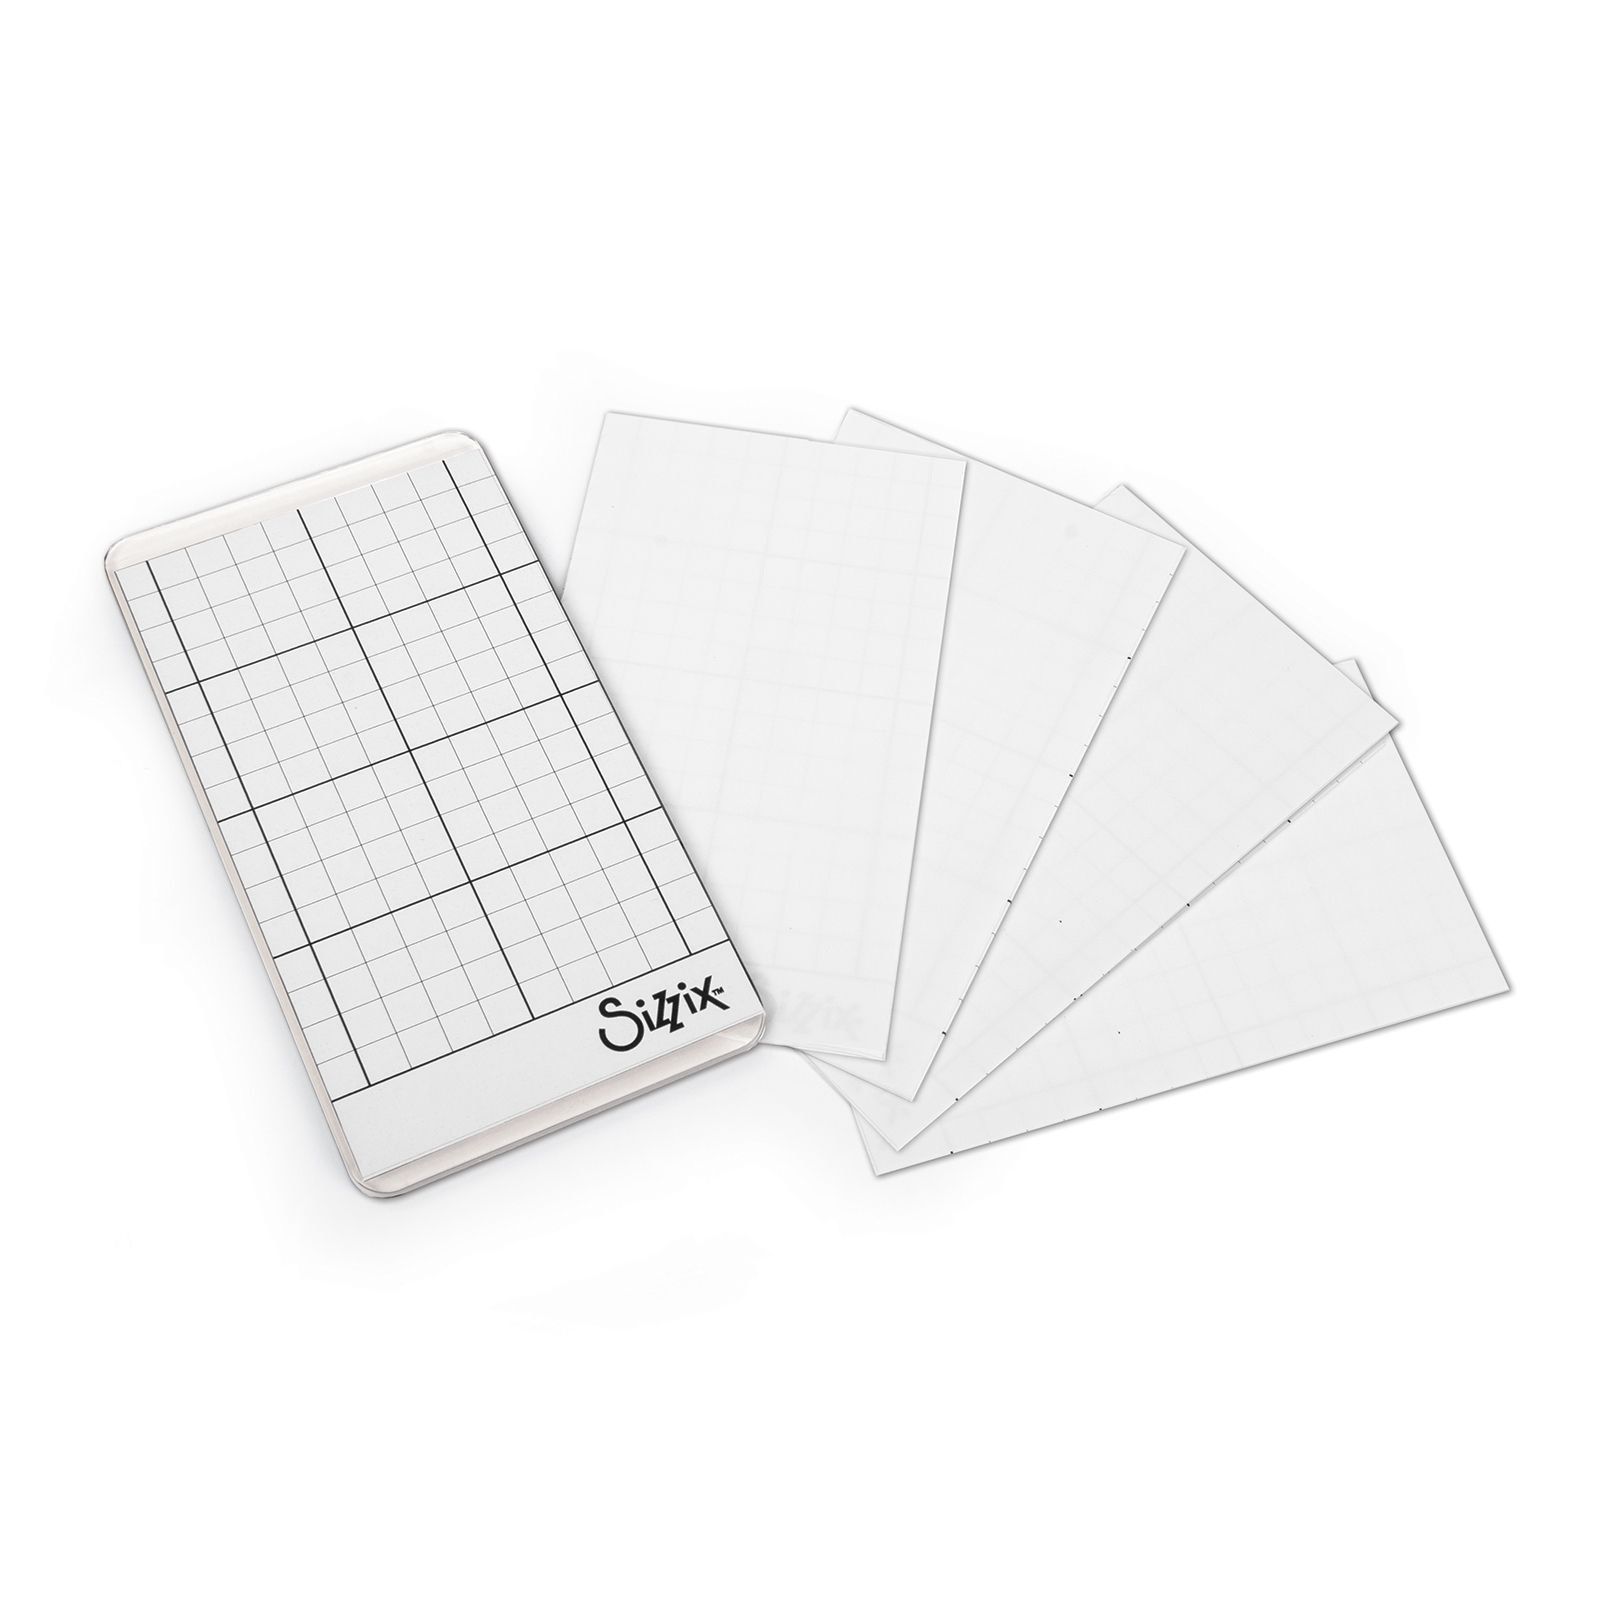 Sizzix • Accessory Sticky Grid Sheets 2 1/2" x 4 1/2" 5 Pack